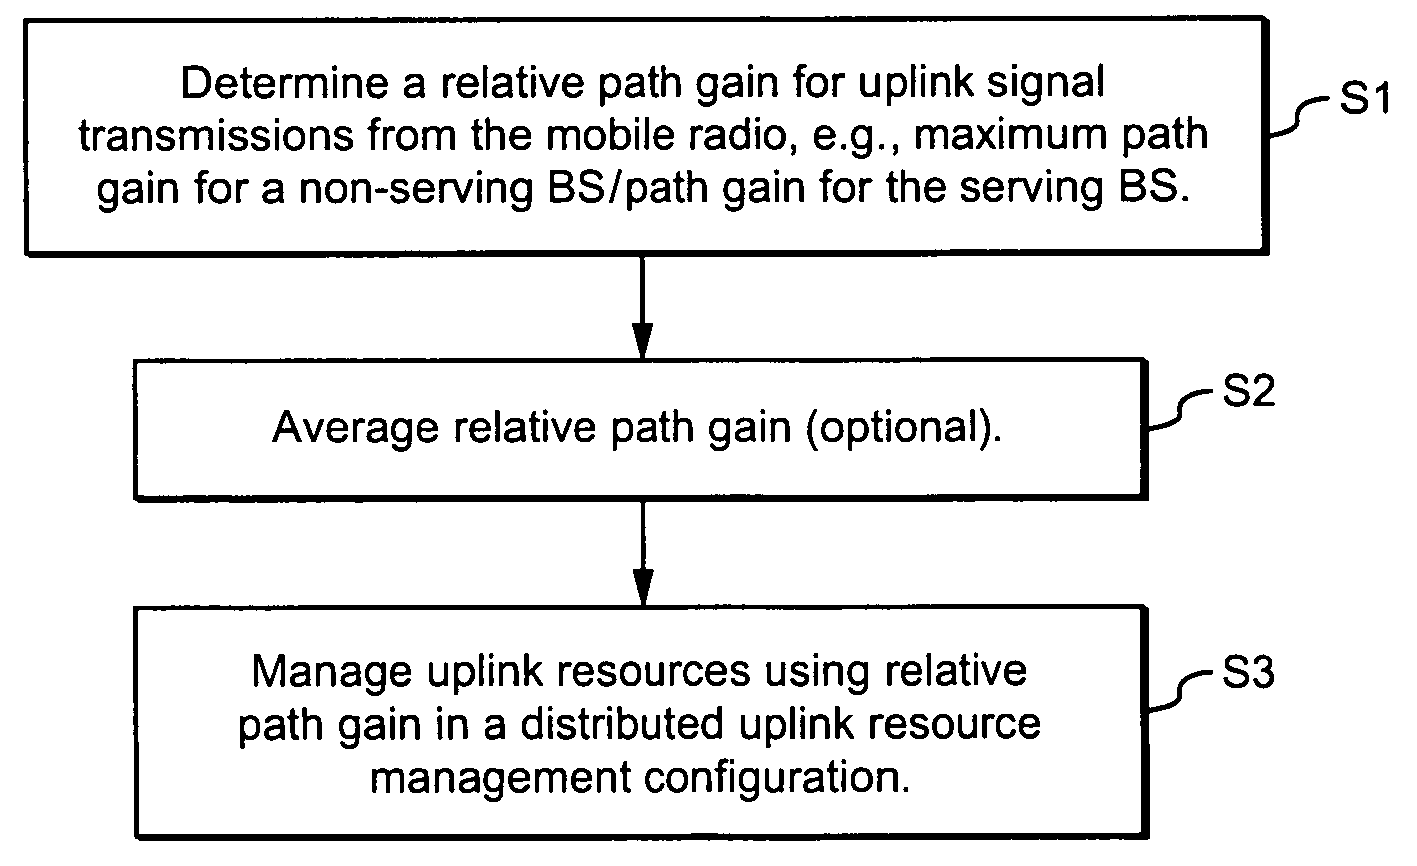 Using uplink relative path gain related measurements to support uplink resource management